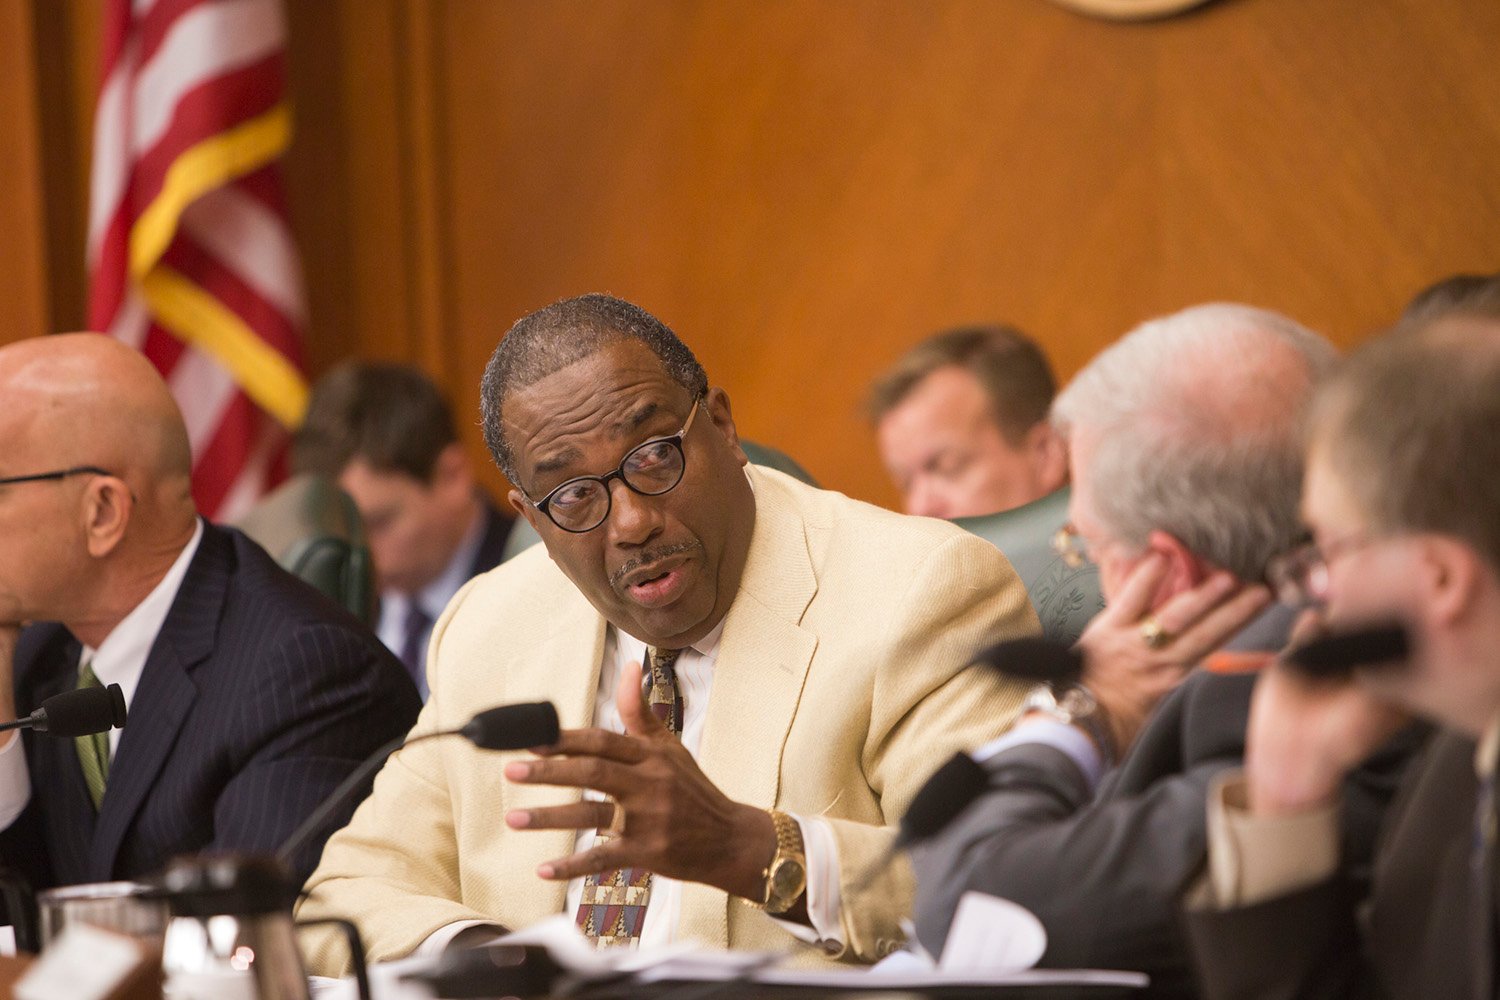 State Sen. Royce West, D-Dallas, during a Senate Finance Committee hearing on Senate Bill 2 on March 14, 2017.